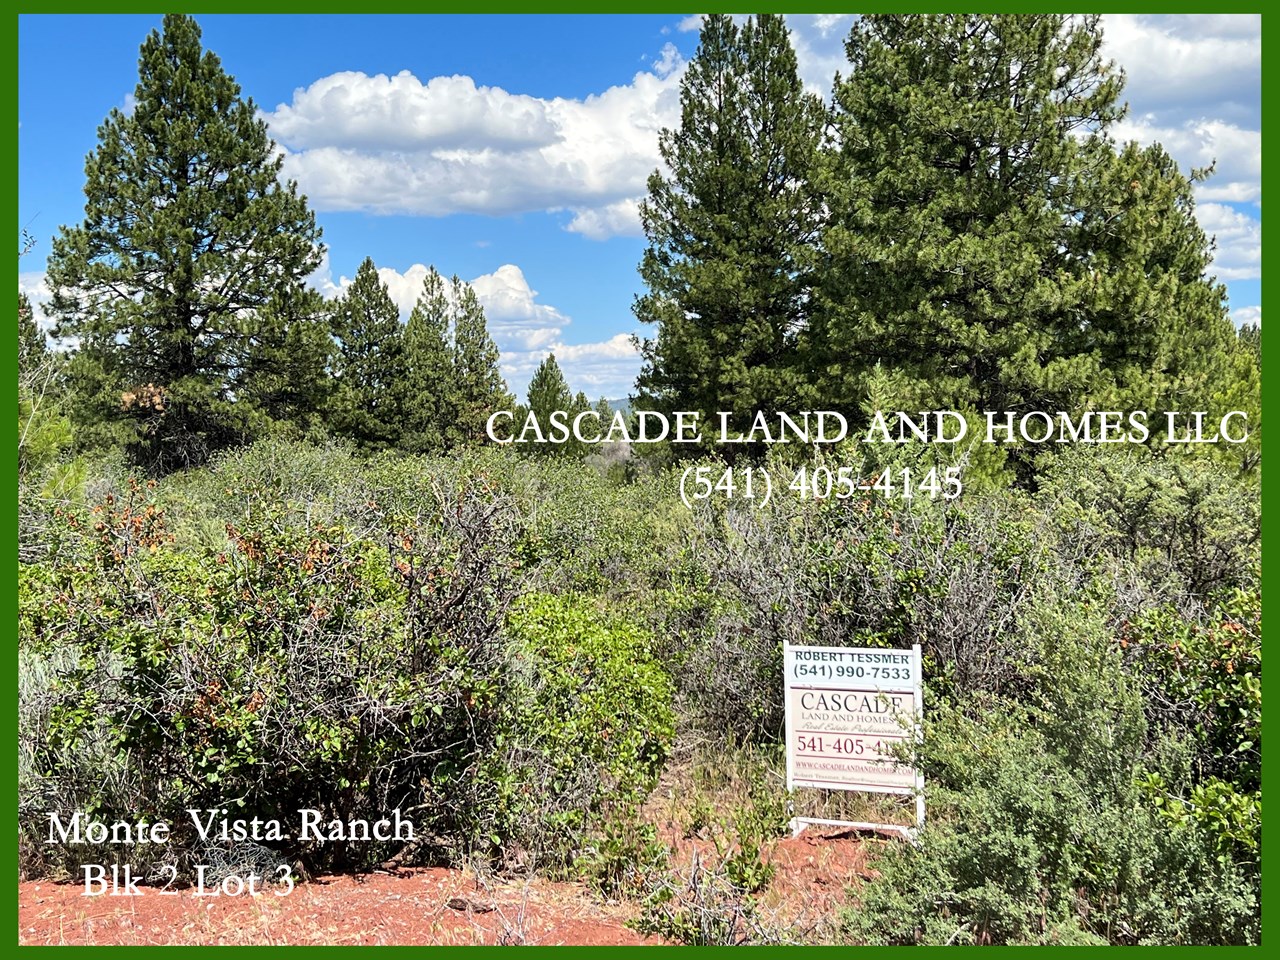 with the spectacular lake views, this is one of the most desirable lots in the subdivision.